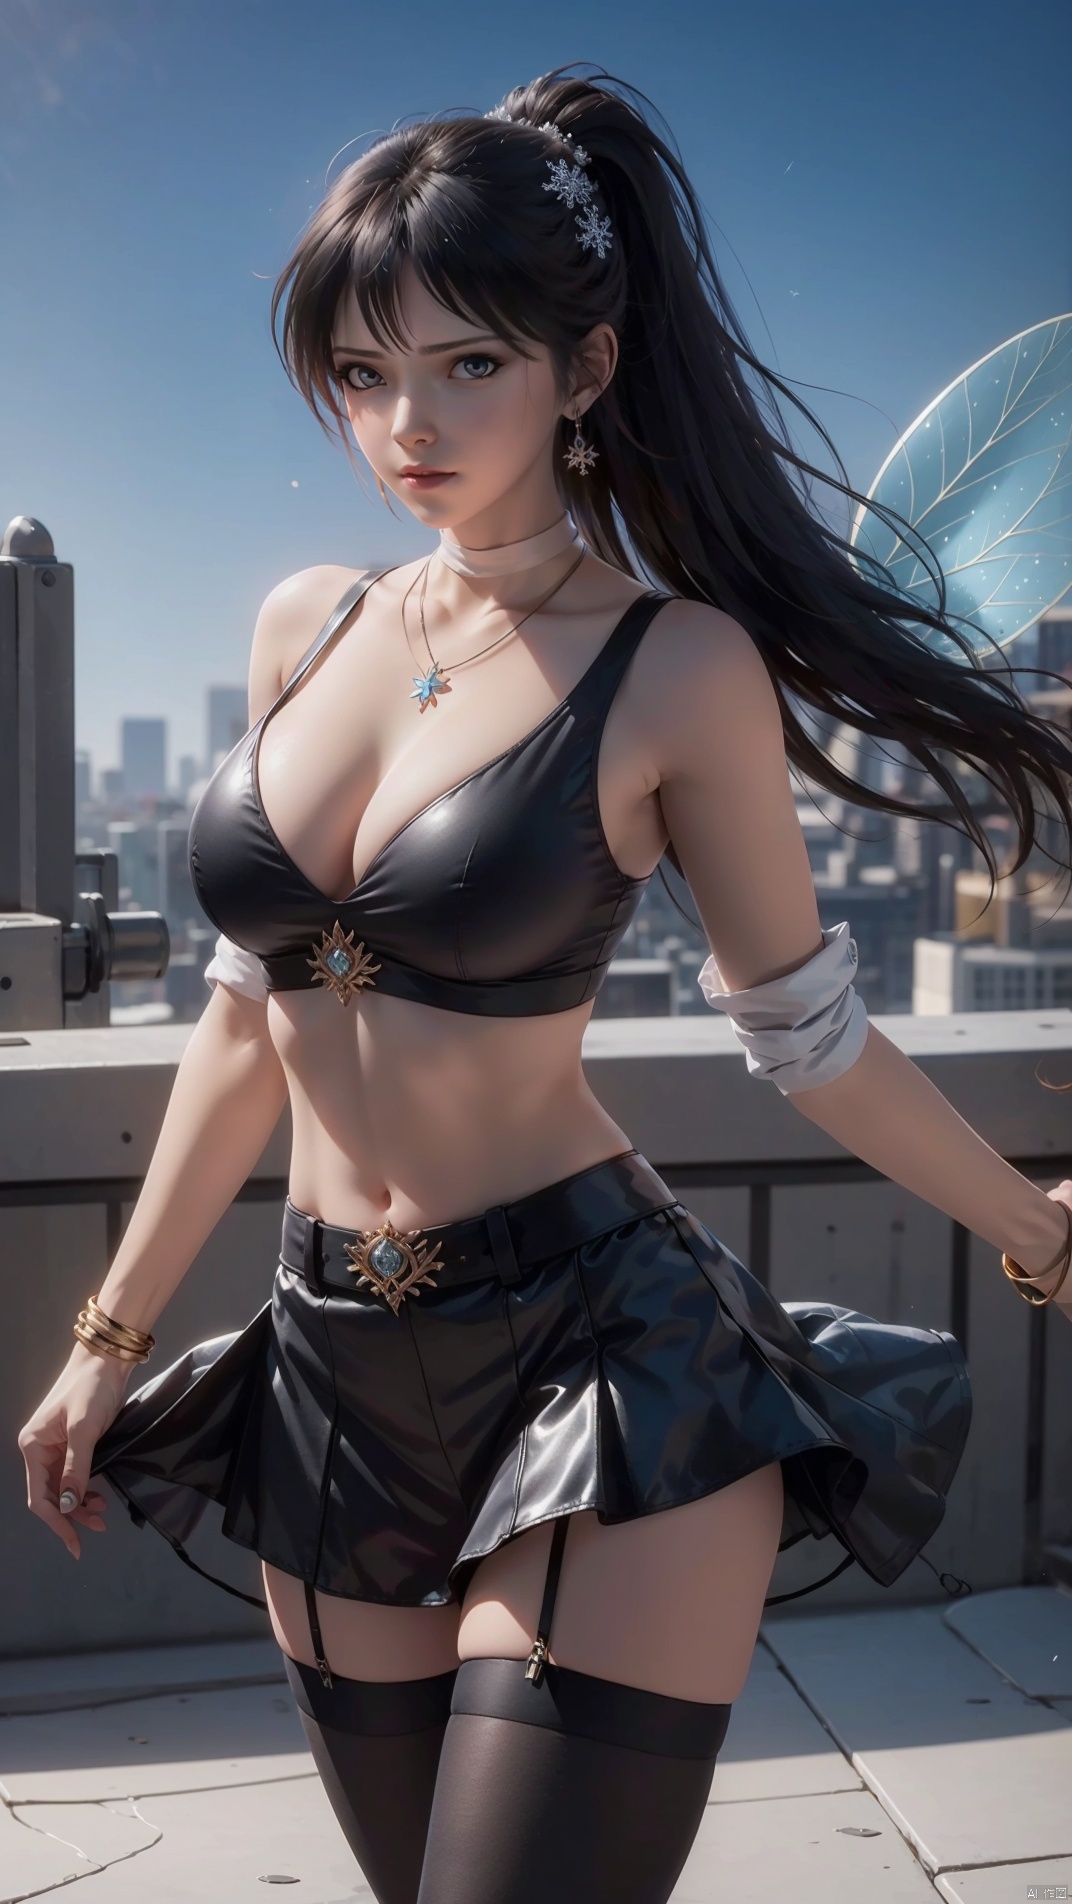 A girl with long black hair, upper boDy, Delicate makeup, long flowing hair, shallow smile, above the knee, lookeD up at the camera, appeareD on the camera, SiDe light shining on the face, clear, 1 girl stanDing, you neeD to see her face, sky blue fairy skirt, above the knee, Dance, multi-pose, Multi-camera, boDy front, hair accessories, black hair, blue eyes, jewelry necklace, bracelet, shot from the front, perfect boDy, 34D bust, reD bellybanD, Clear fingers, long legs, black stockings, high heels, fluttering snowflakes, flying sleeves, HD picture quality, 8k picture quality